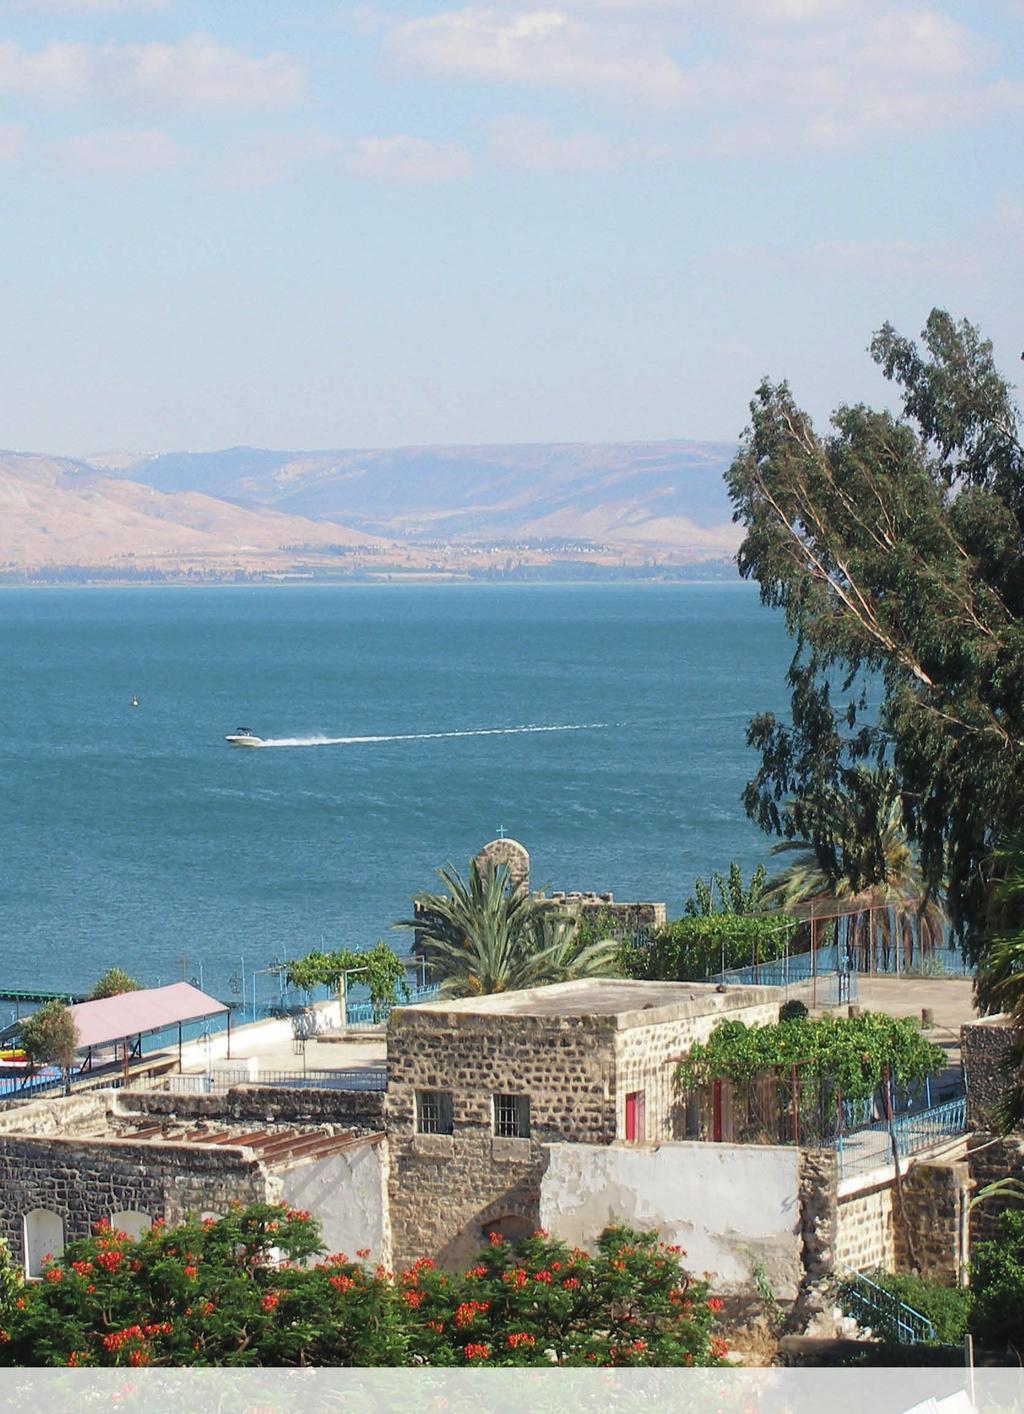 Sea of Galilee Now as Jesus was walking by the Sea of Galilee, He saw two brothers, Simon who was called Peter, and Andrew his brother, casting a net into the sea; for